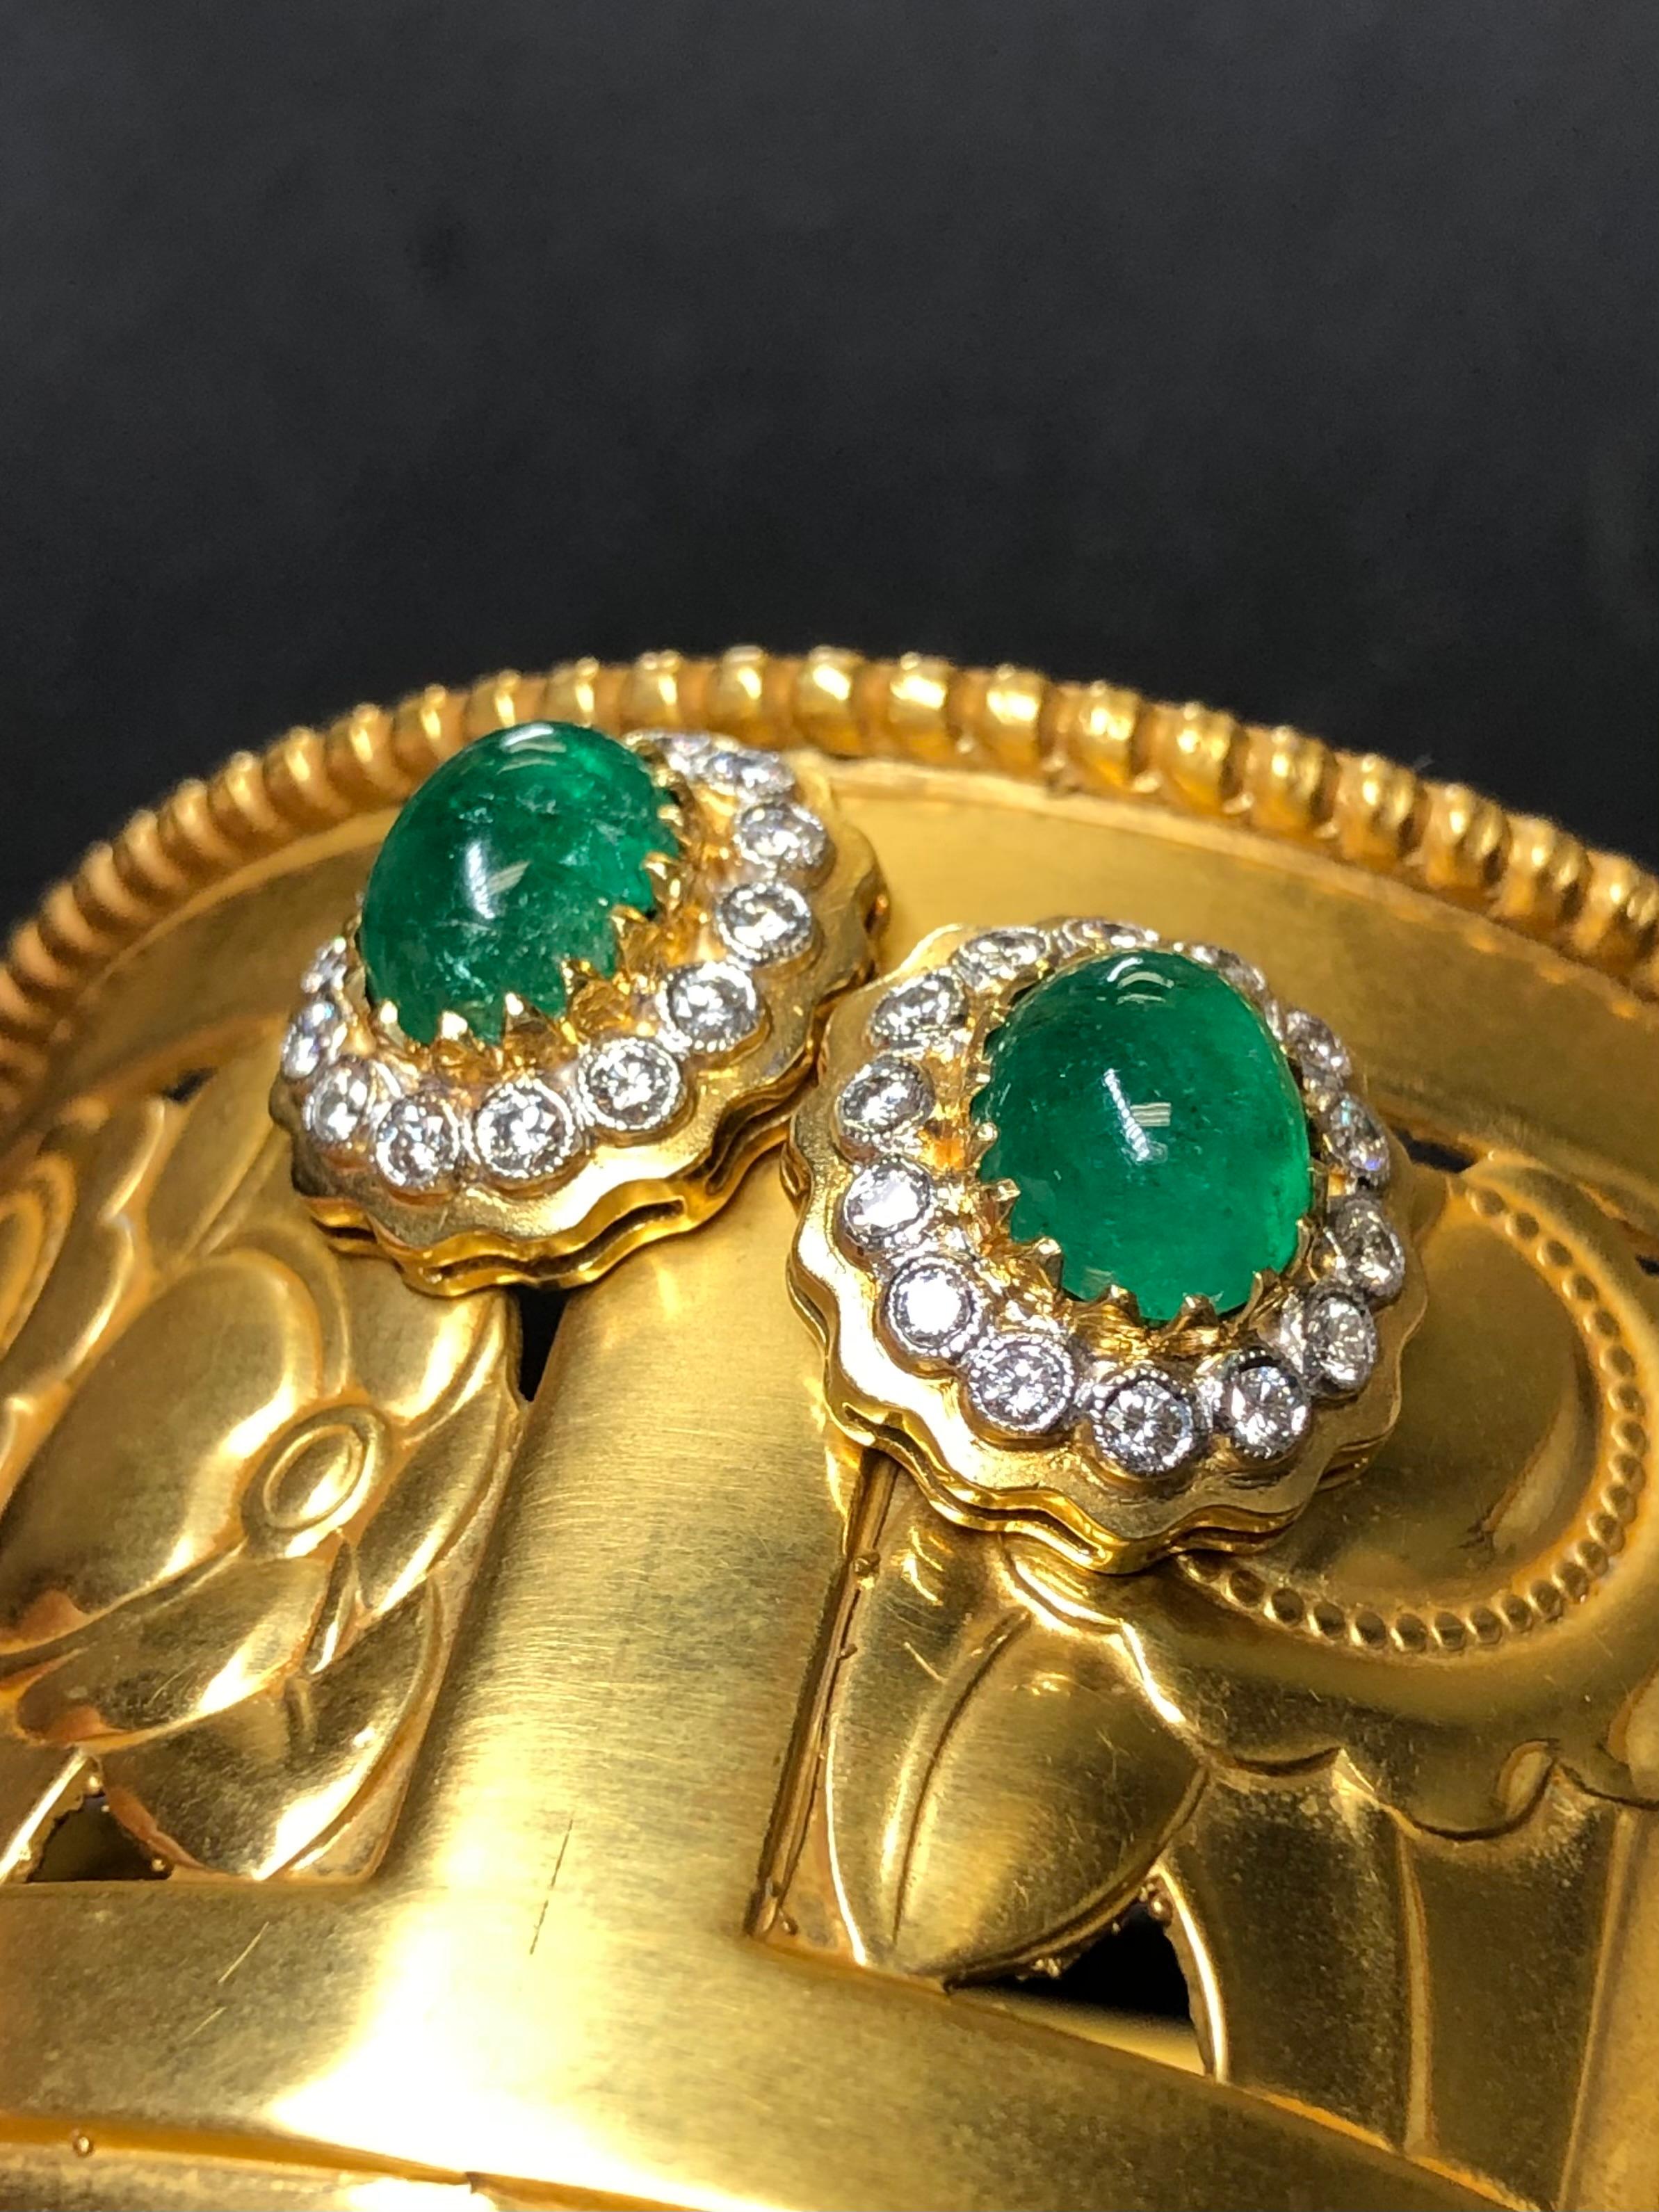 A sensational pair of earrings done in 18K yellow gold and platinum, prong set with approximately 1.40cttw in F-G color Vs1+ clarity round diamonds and centered by 4ct EACH (8cttw) natural cabochon emeralds exhibiting gorgeous color (photos are